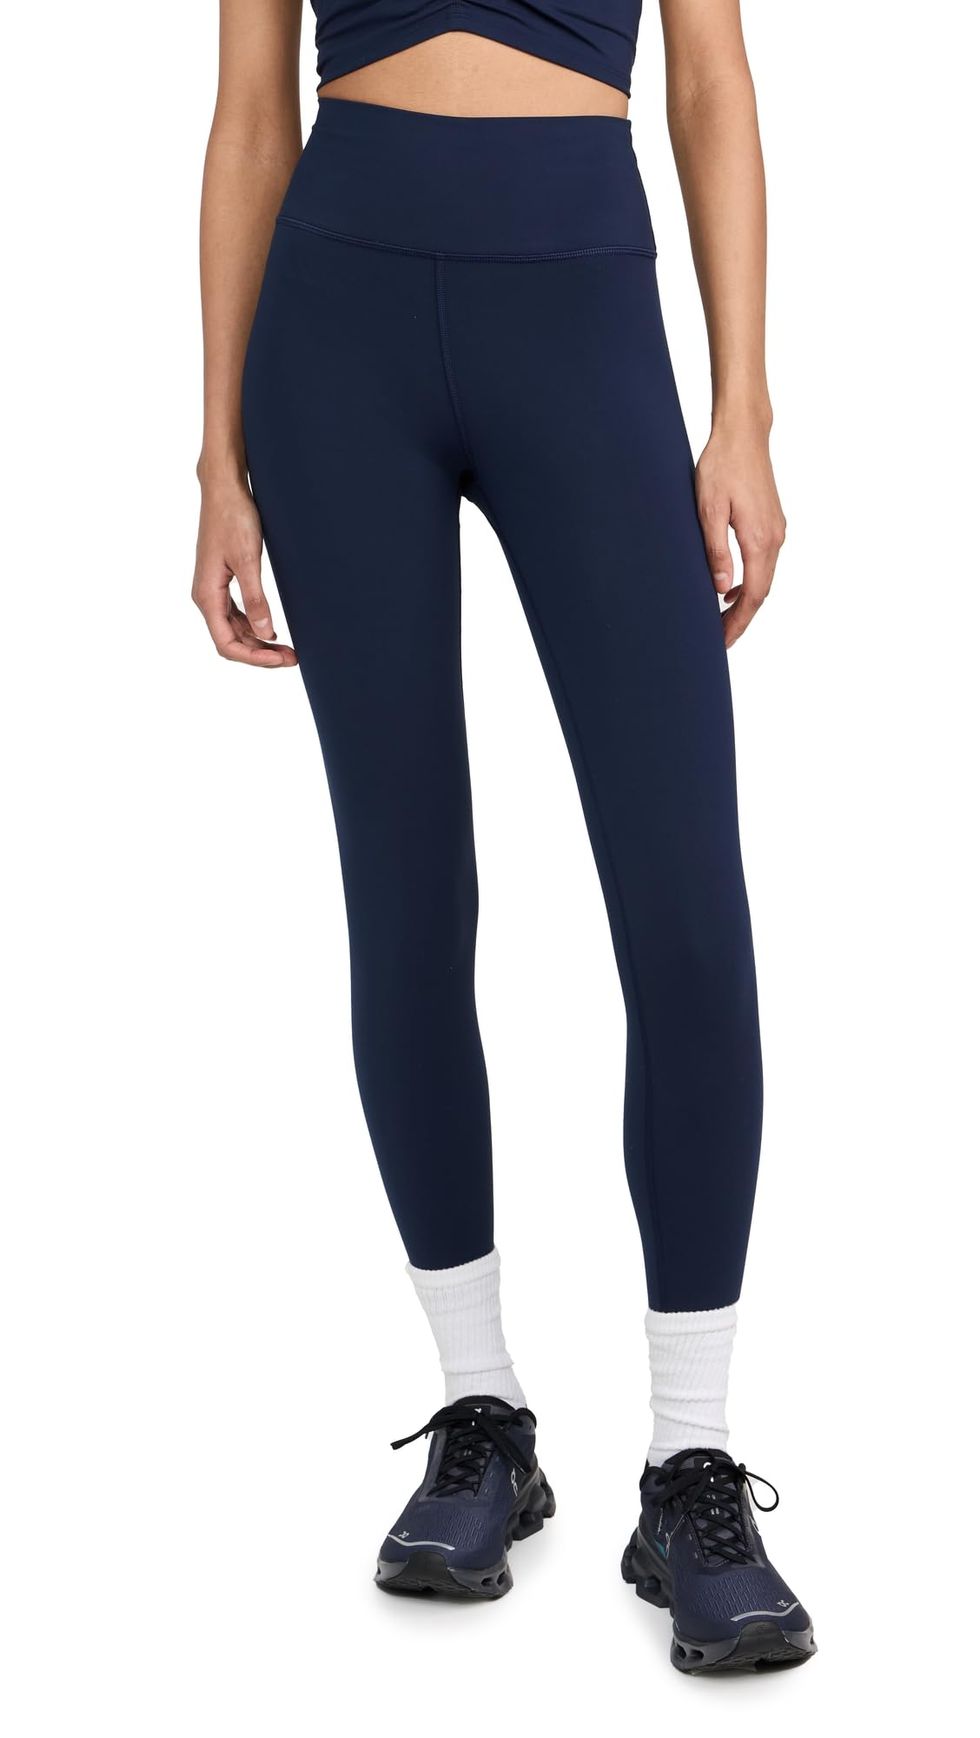 Women's Everly Cinched Waist Leggings